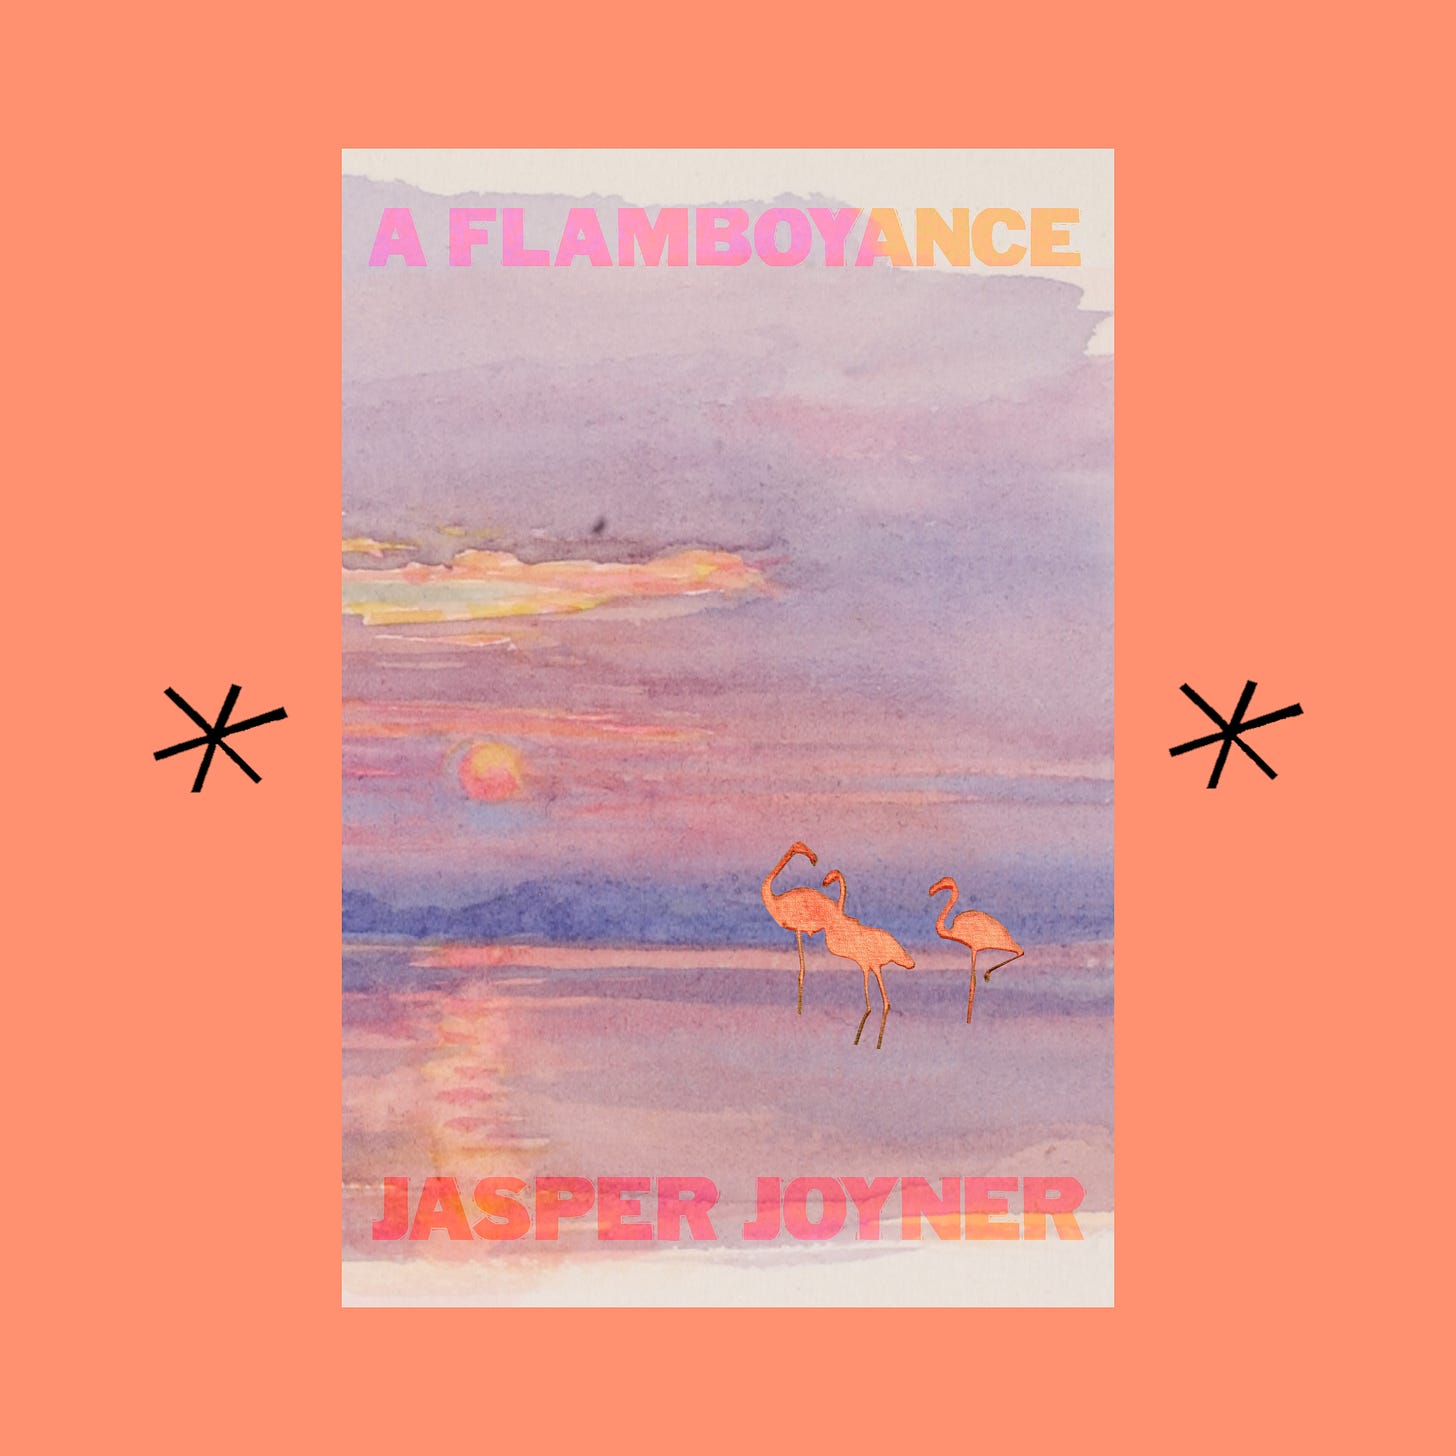 Abstract chapbook cover of A Flamboyance by Jasper Joyner featuring three flamingos in front of a pinkish blueish sky. The cover is surrounded by a peach background.